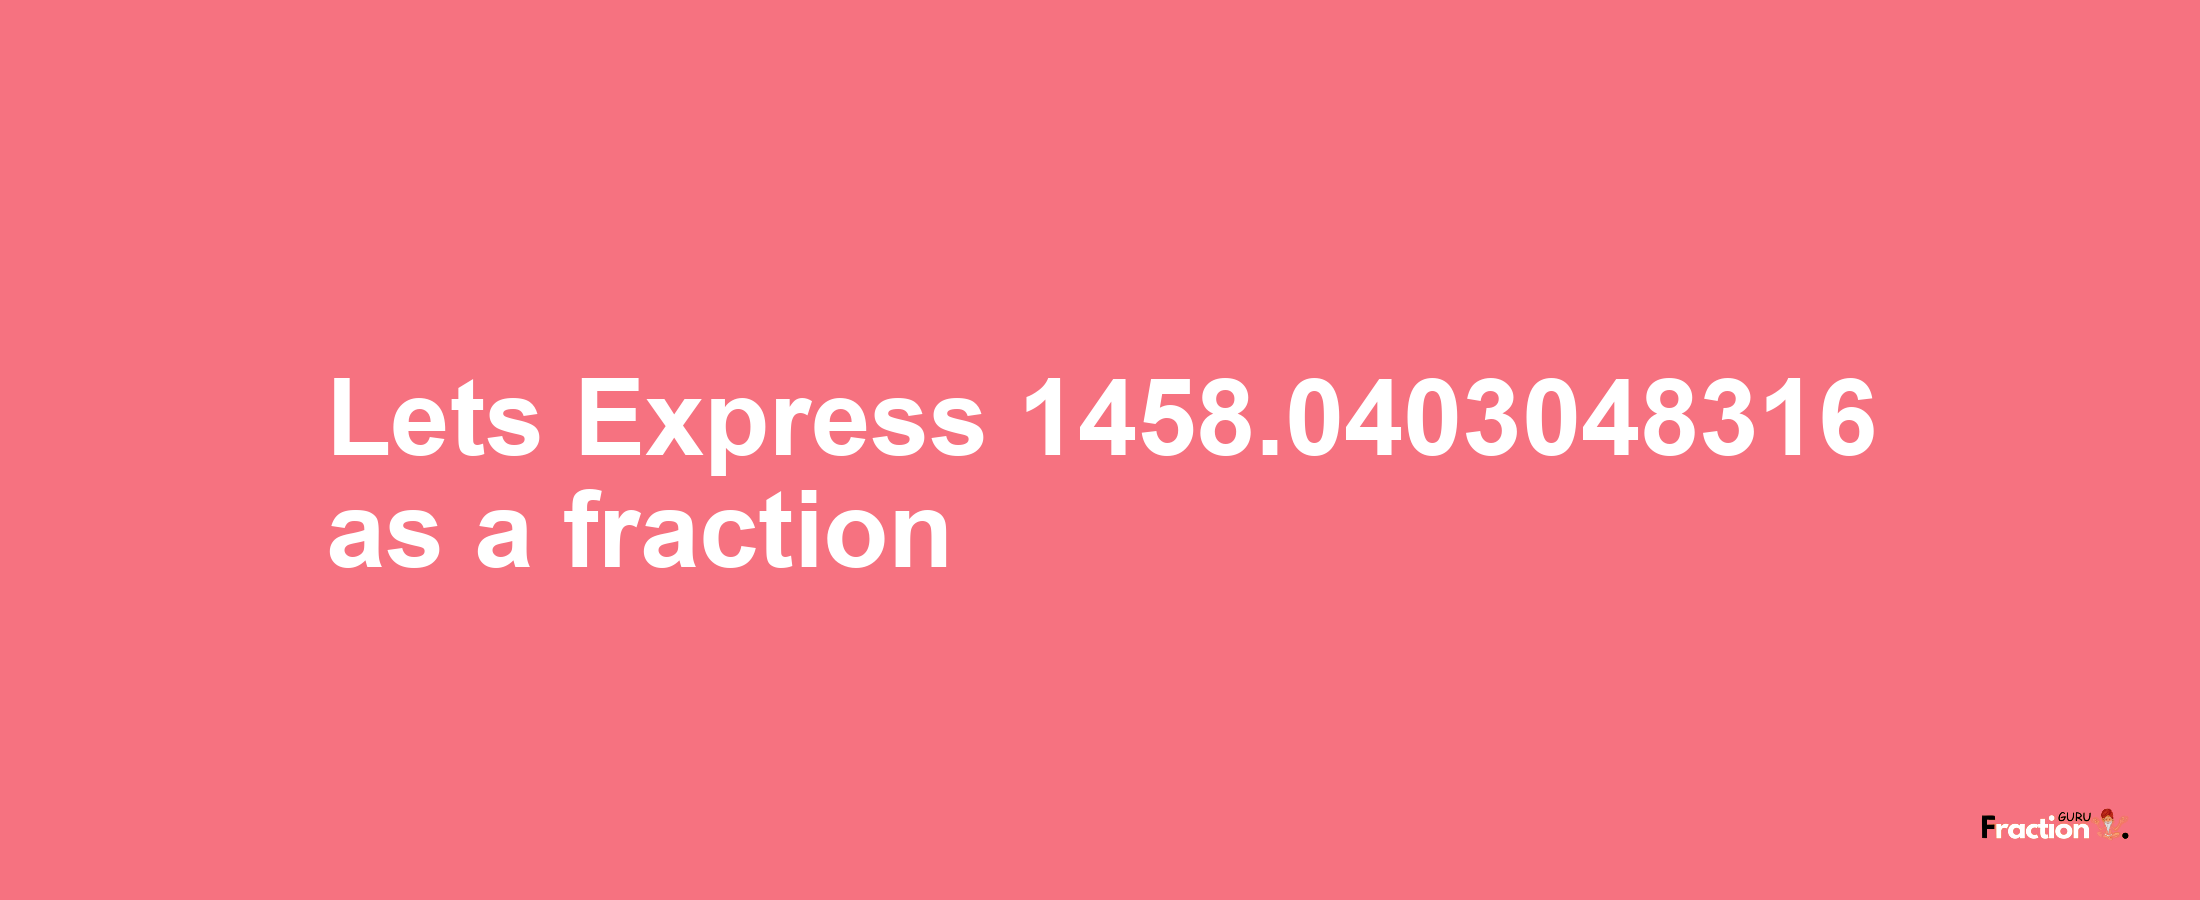 Lets Express 1458.0403048316 as afraction